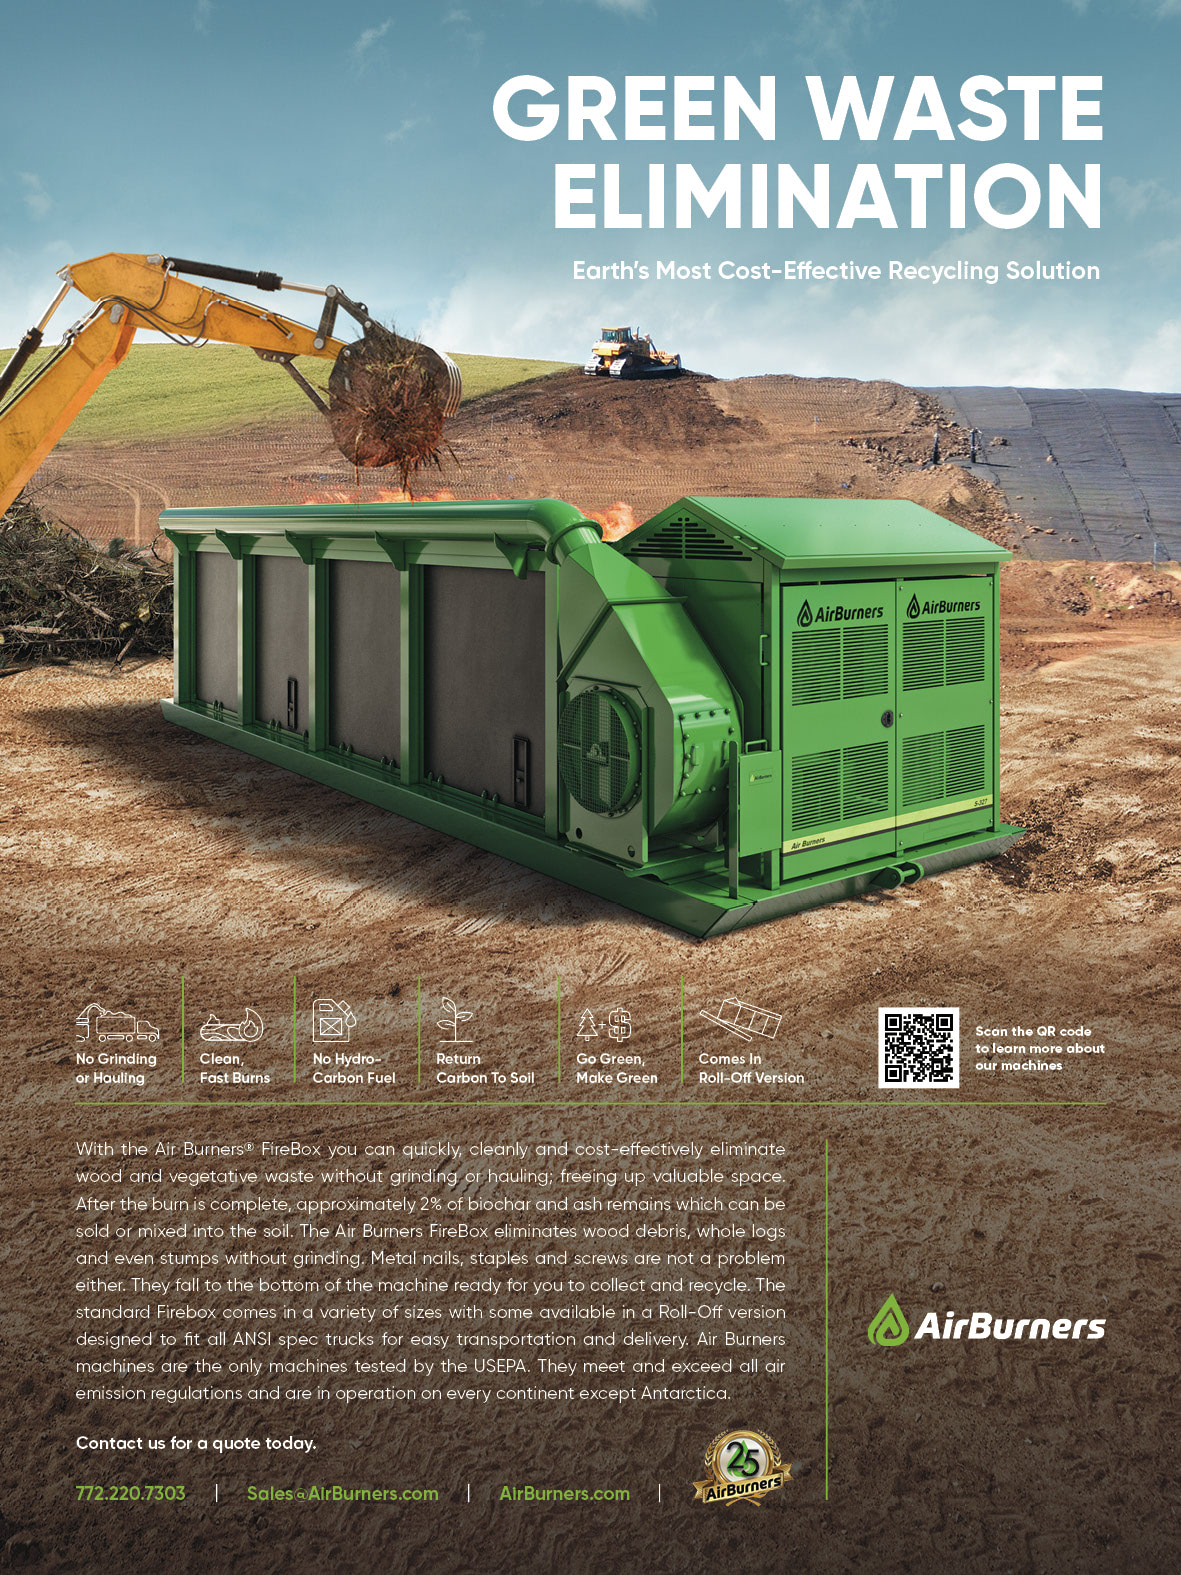 Waste Today Editorial Ad